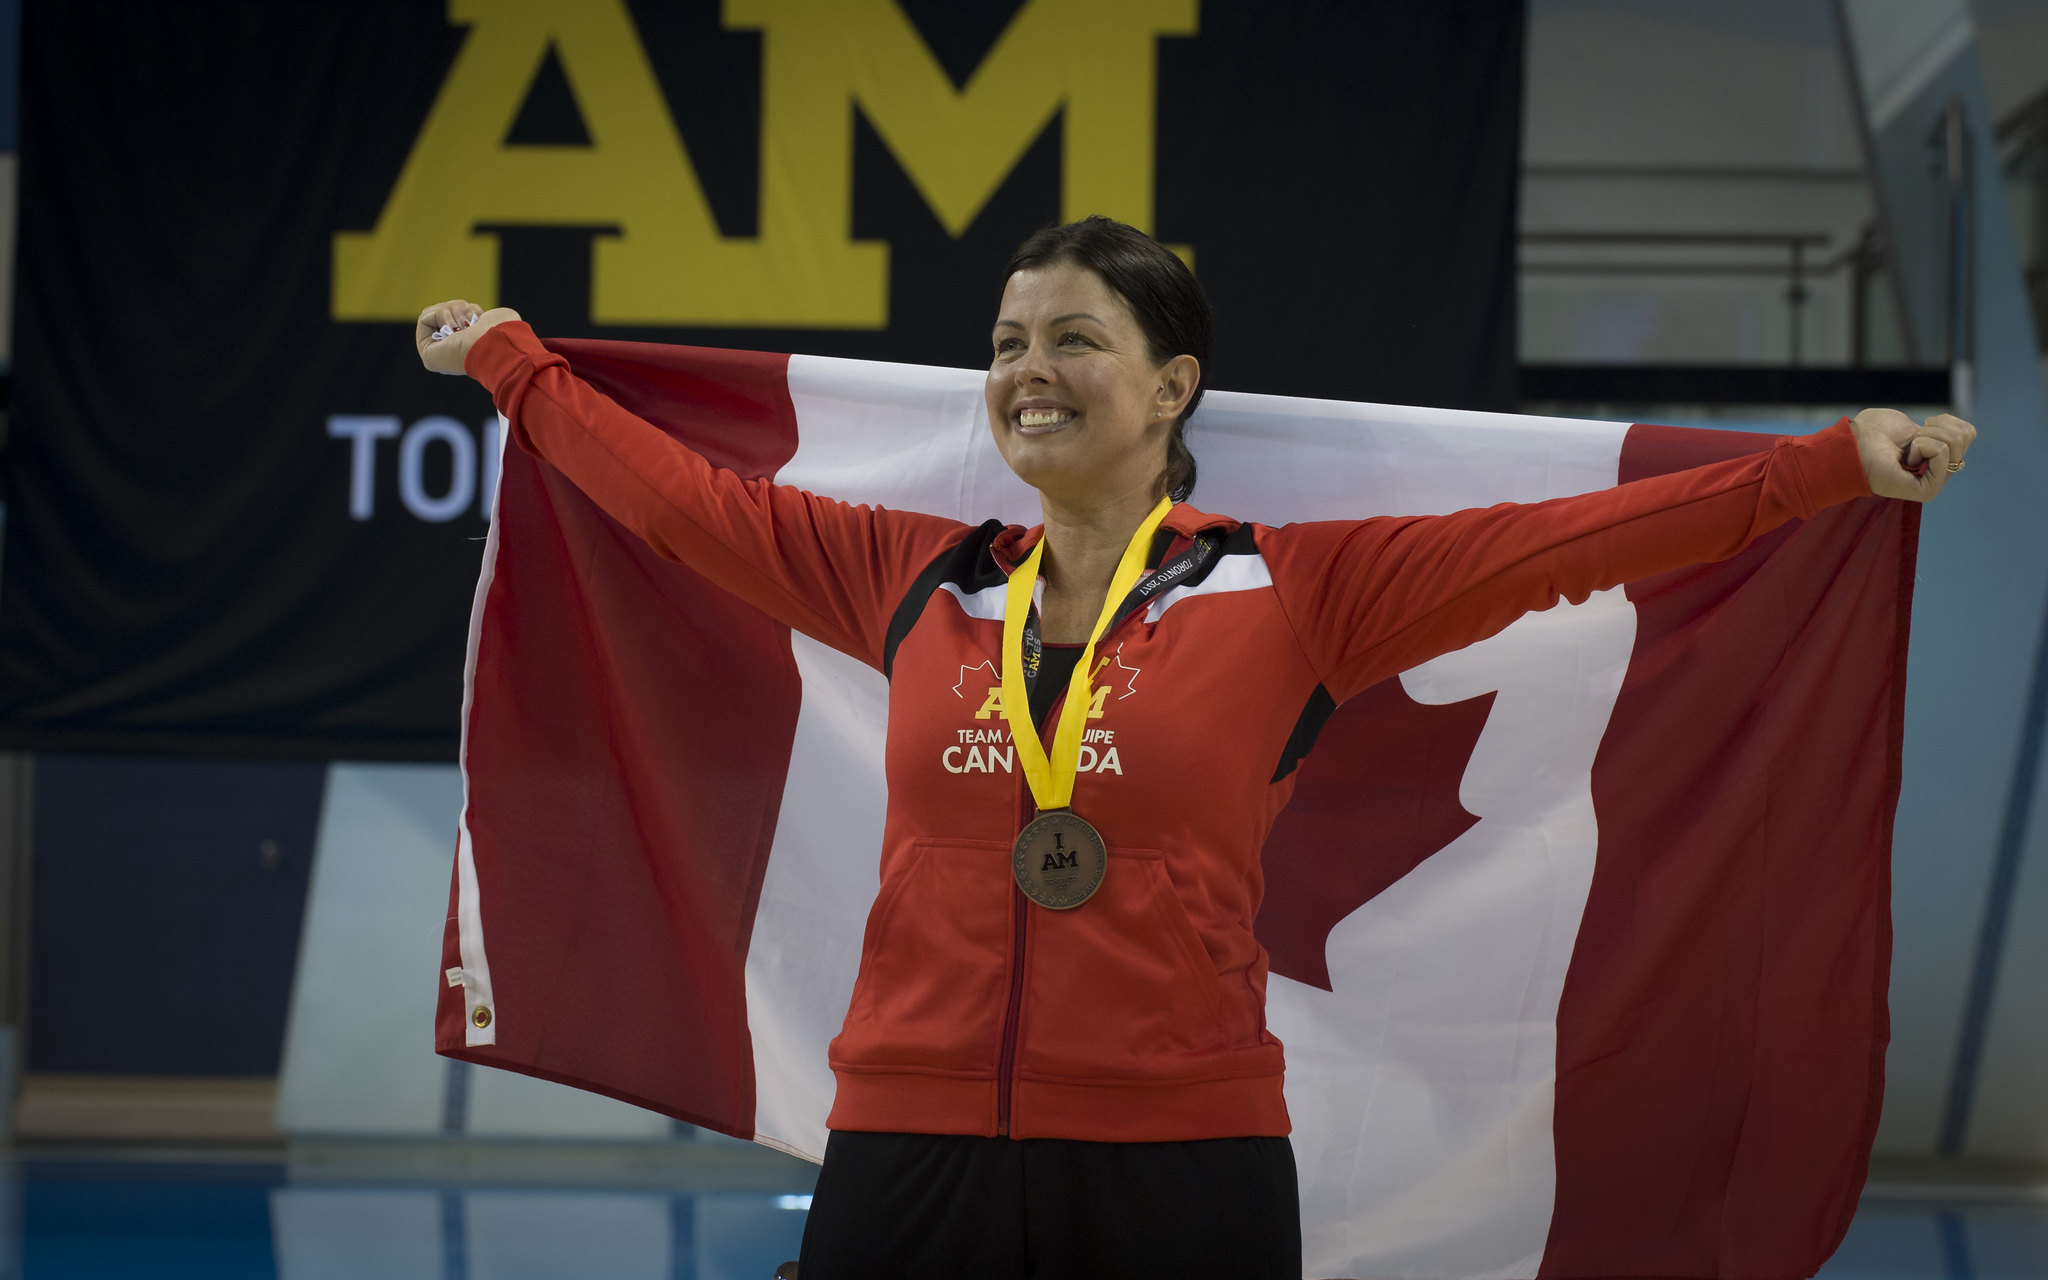 Take a look at the schedule and results of the Invictus Games activities as they take place!